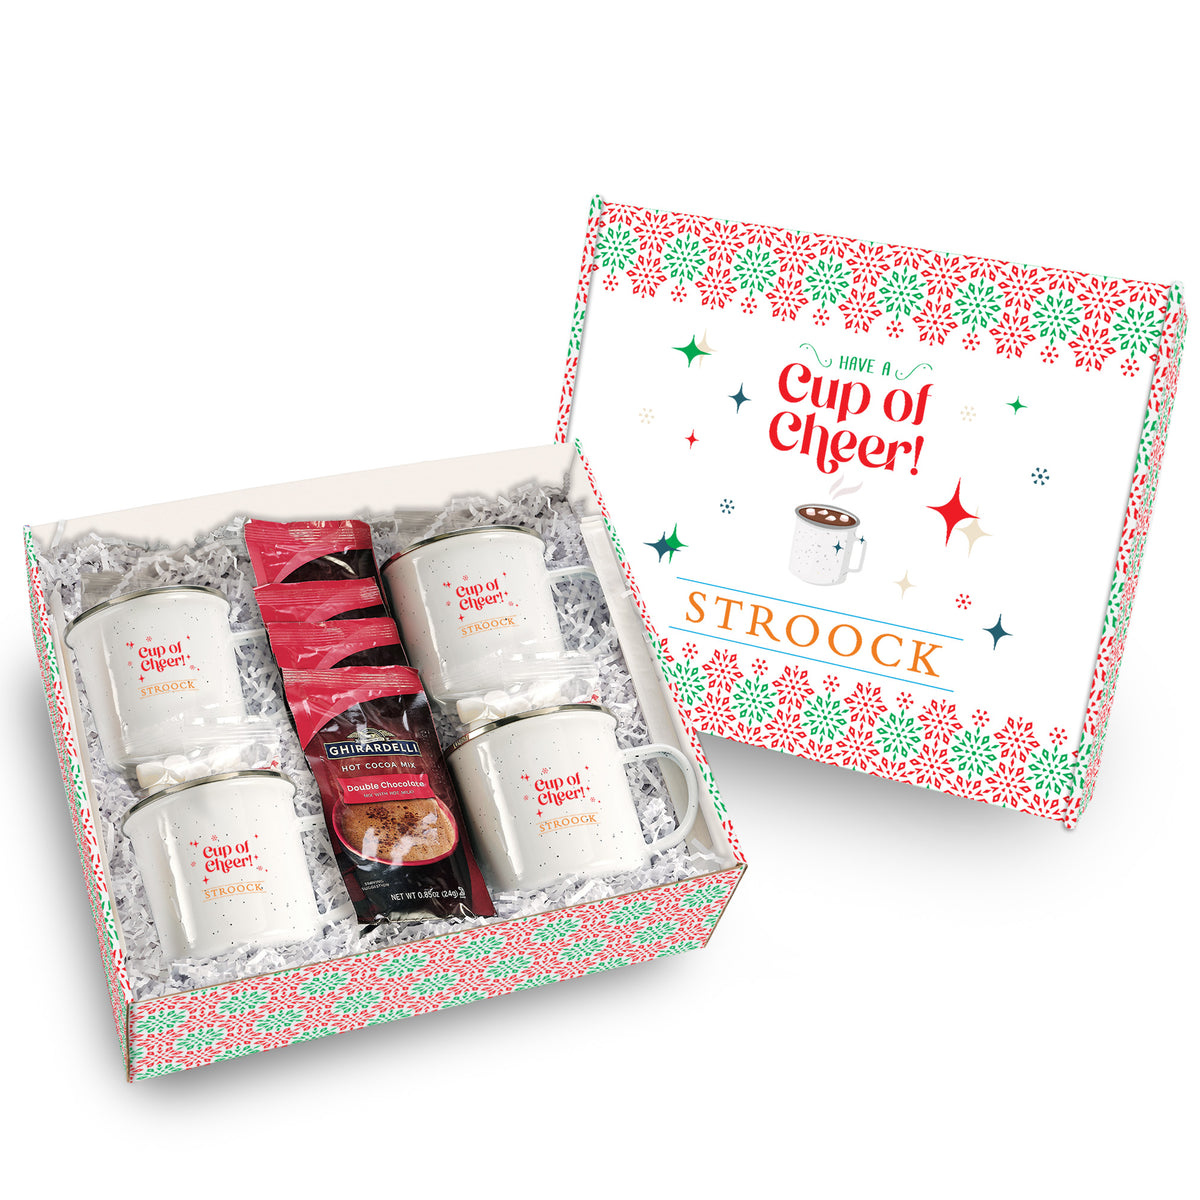 Cup of Cheer Gift Set in Mailer Box